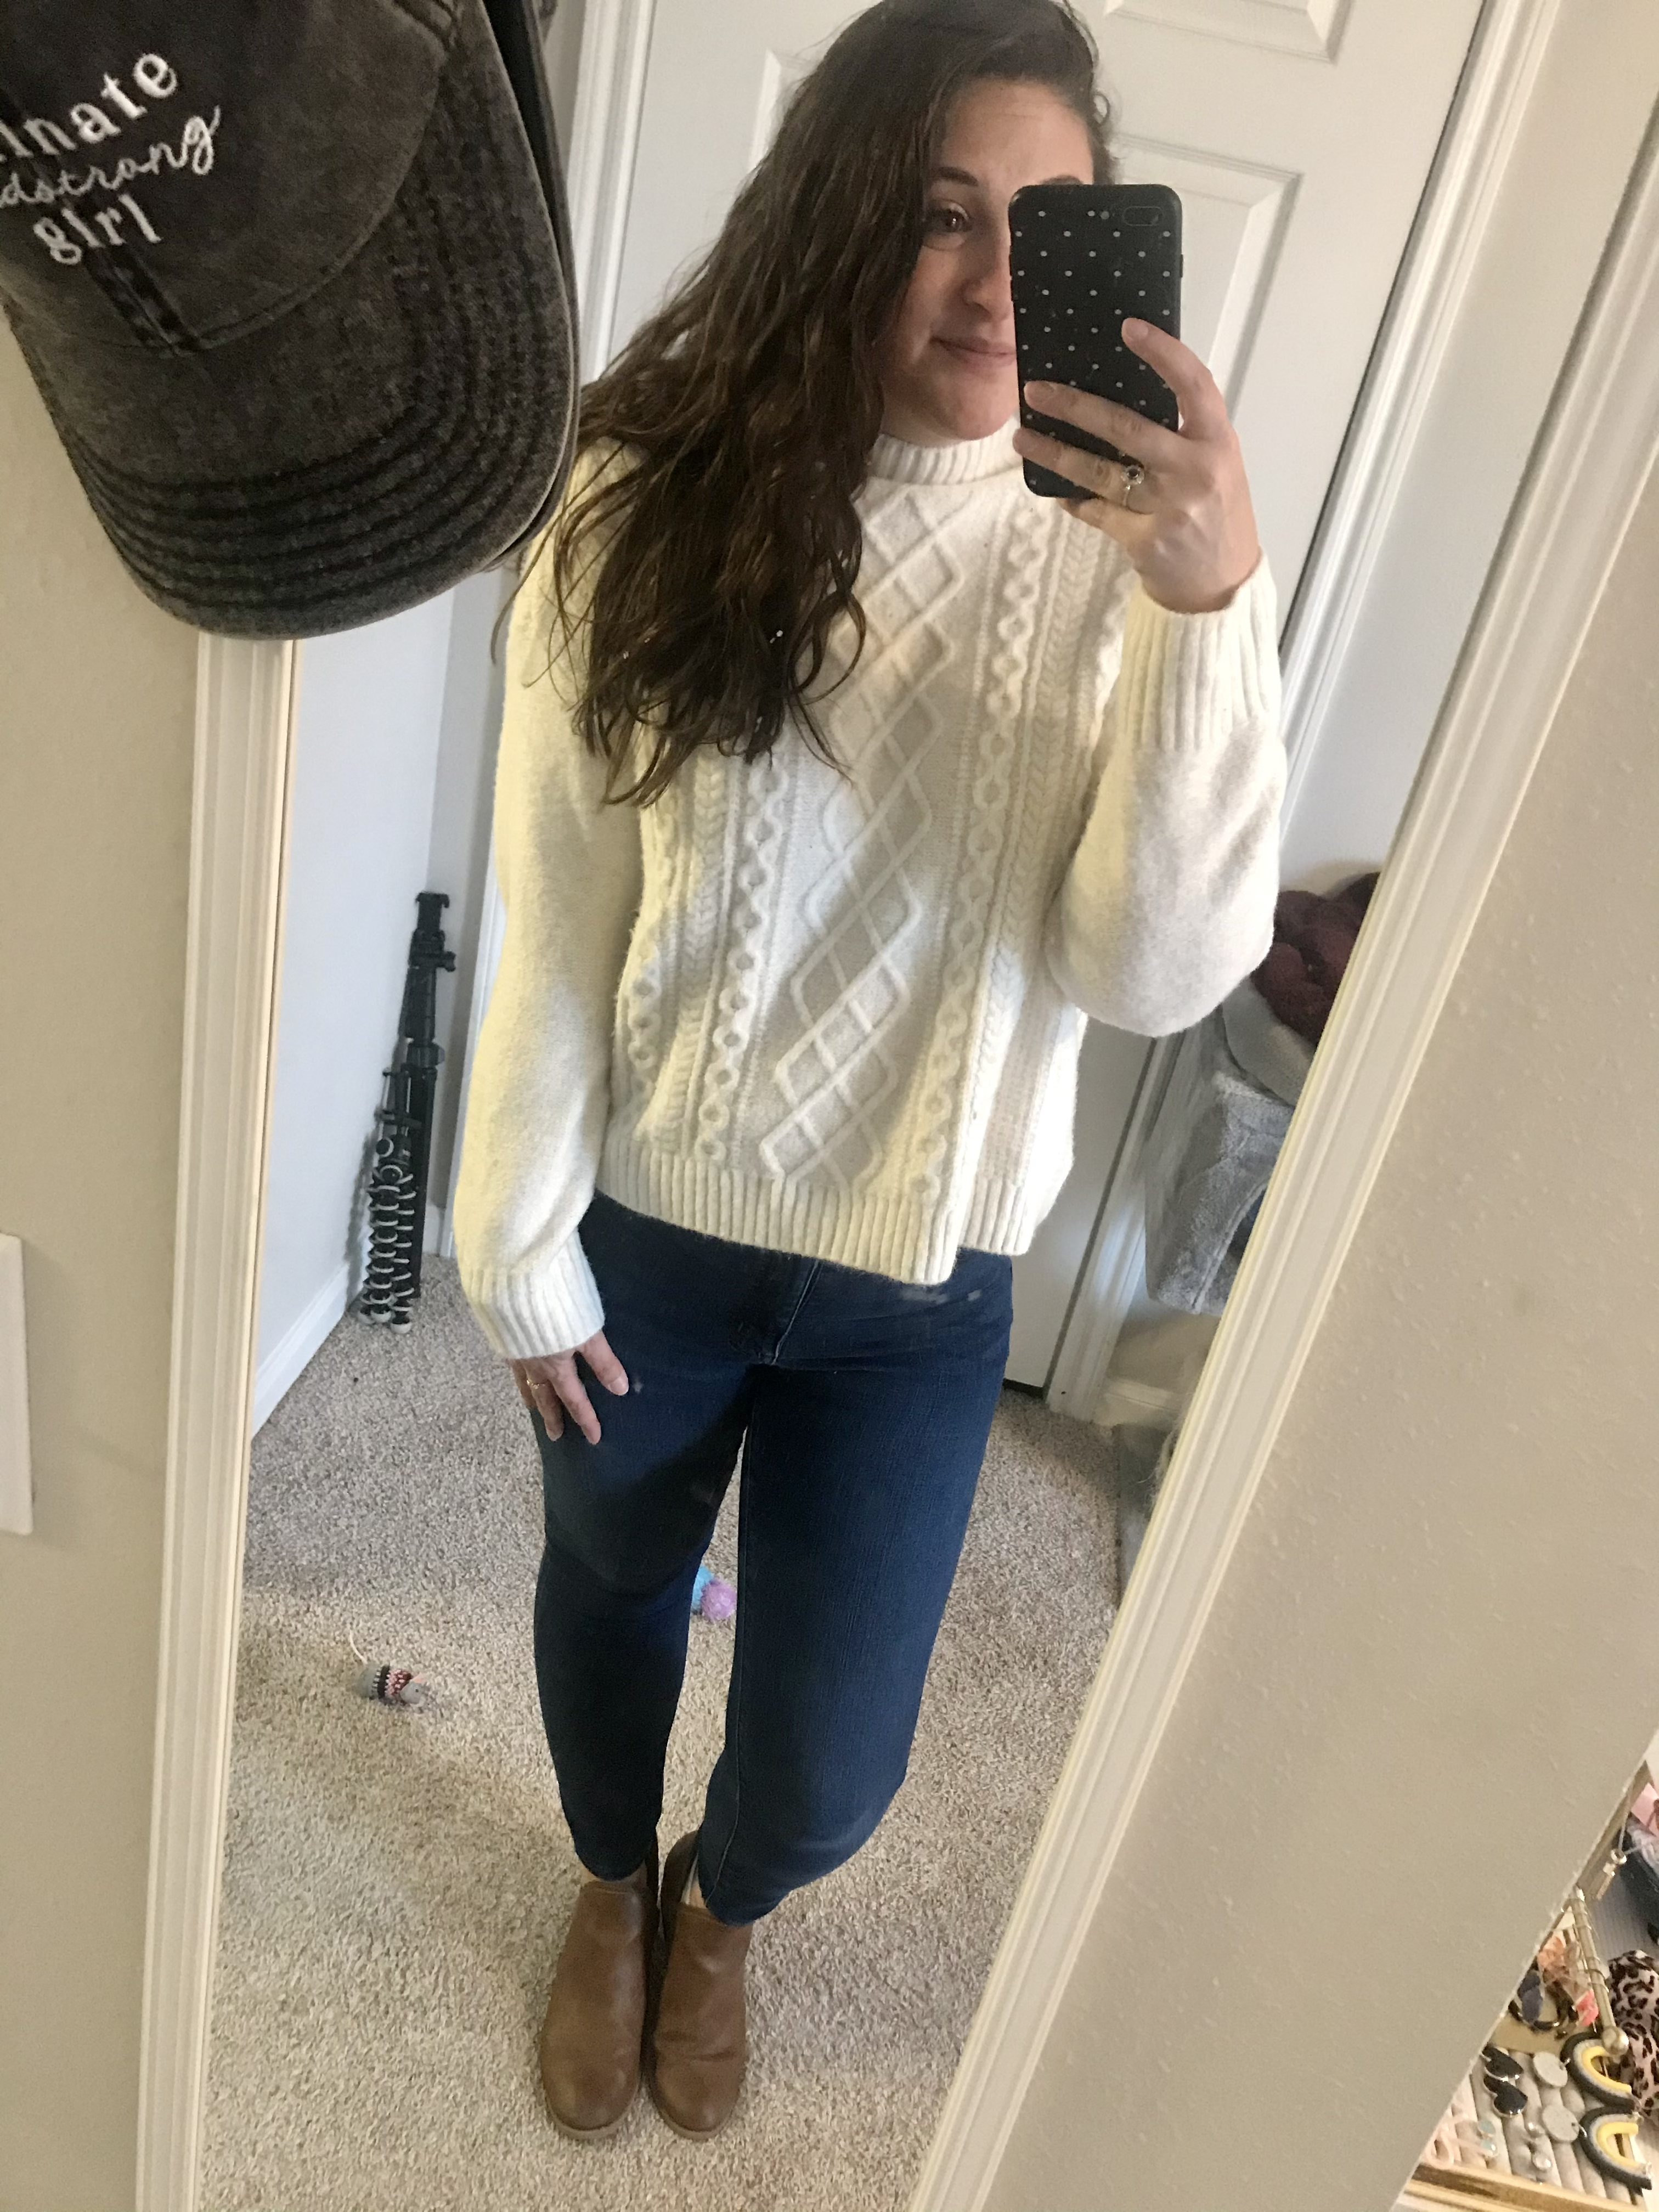 Girl in white turtleneck sweater with blue jeans and brown boots